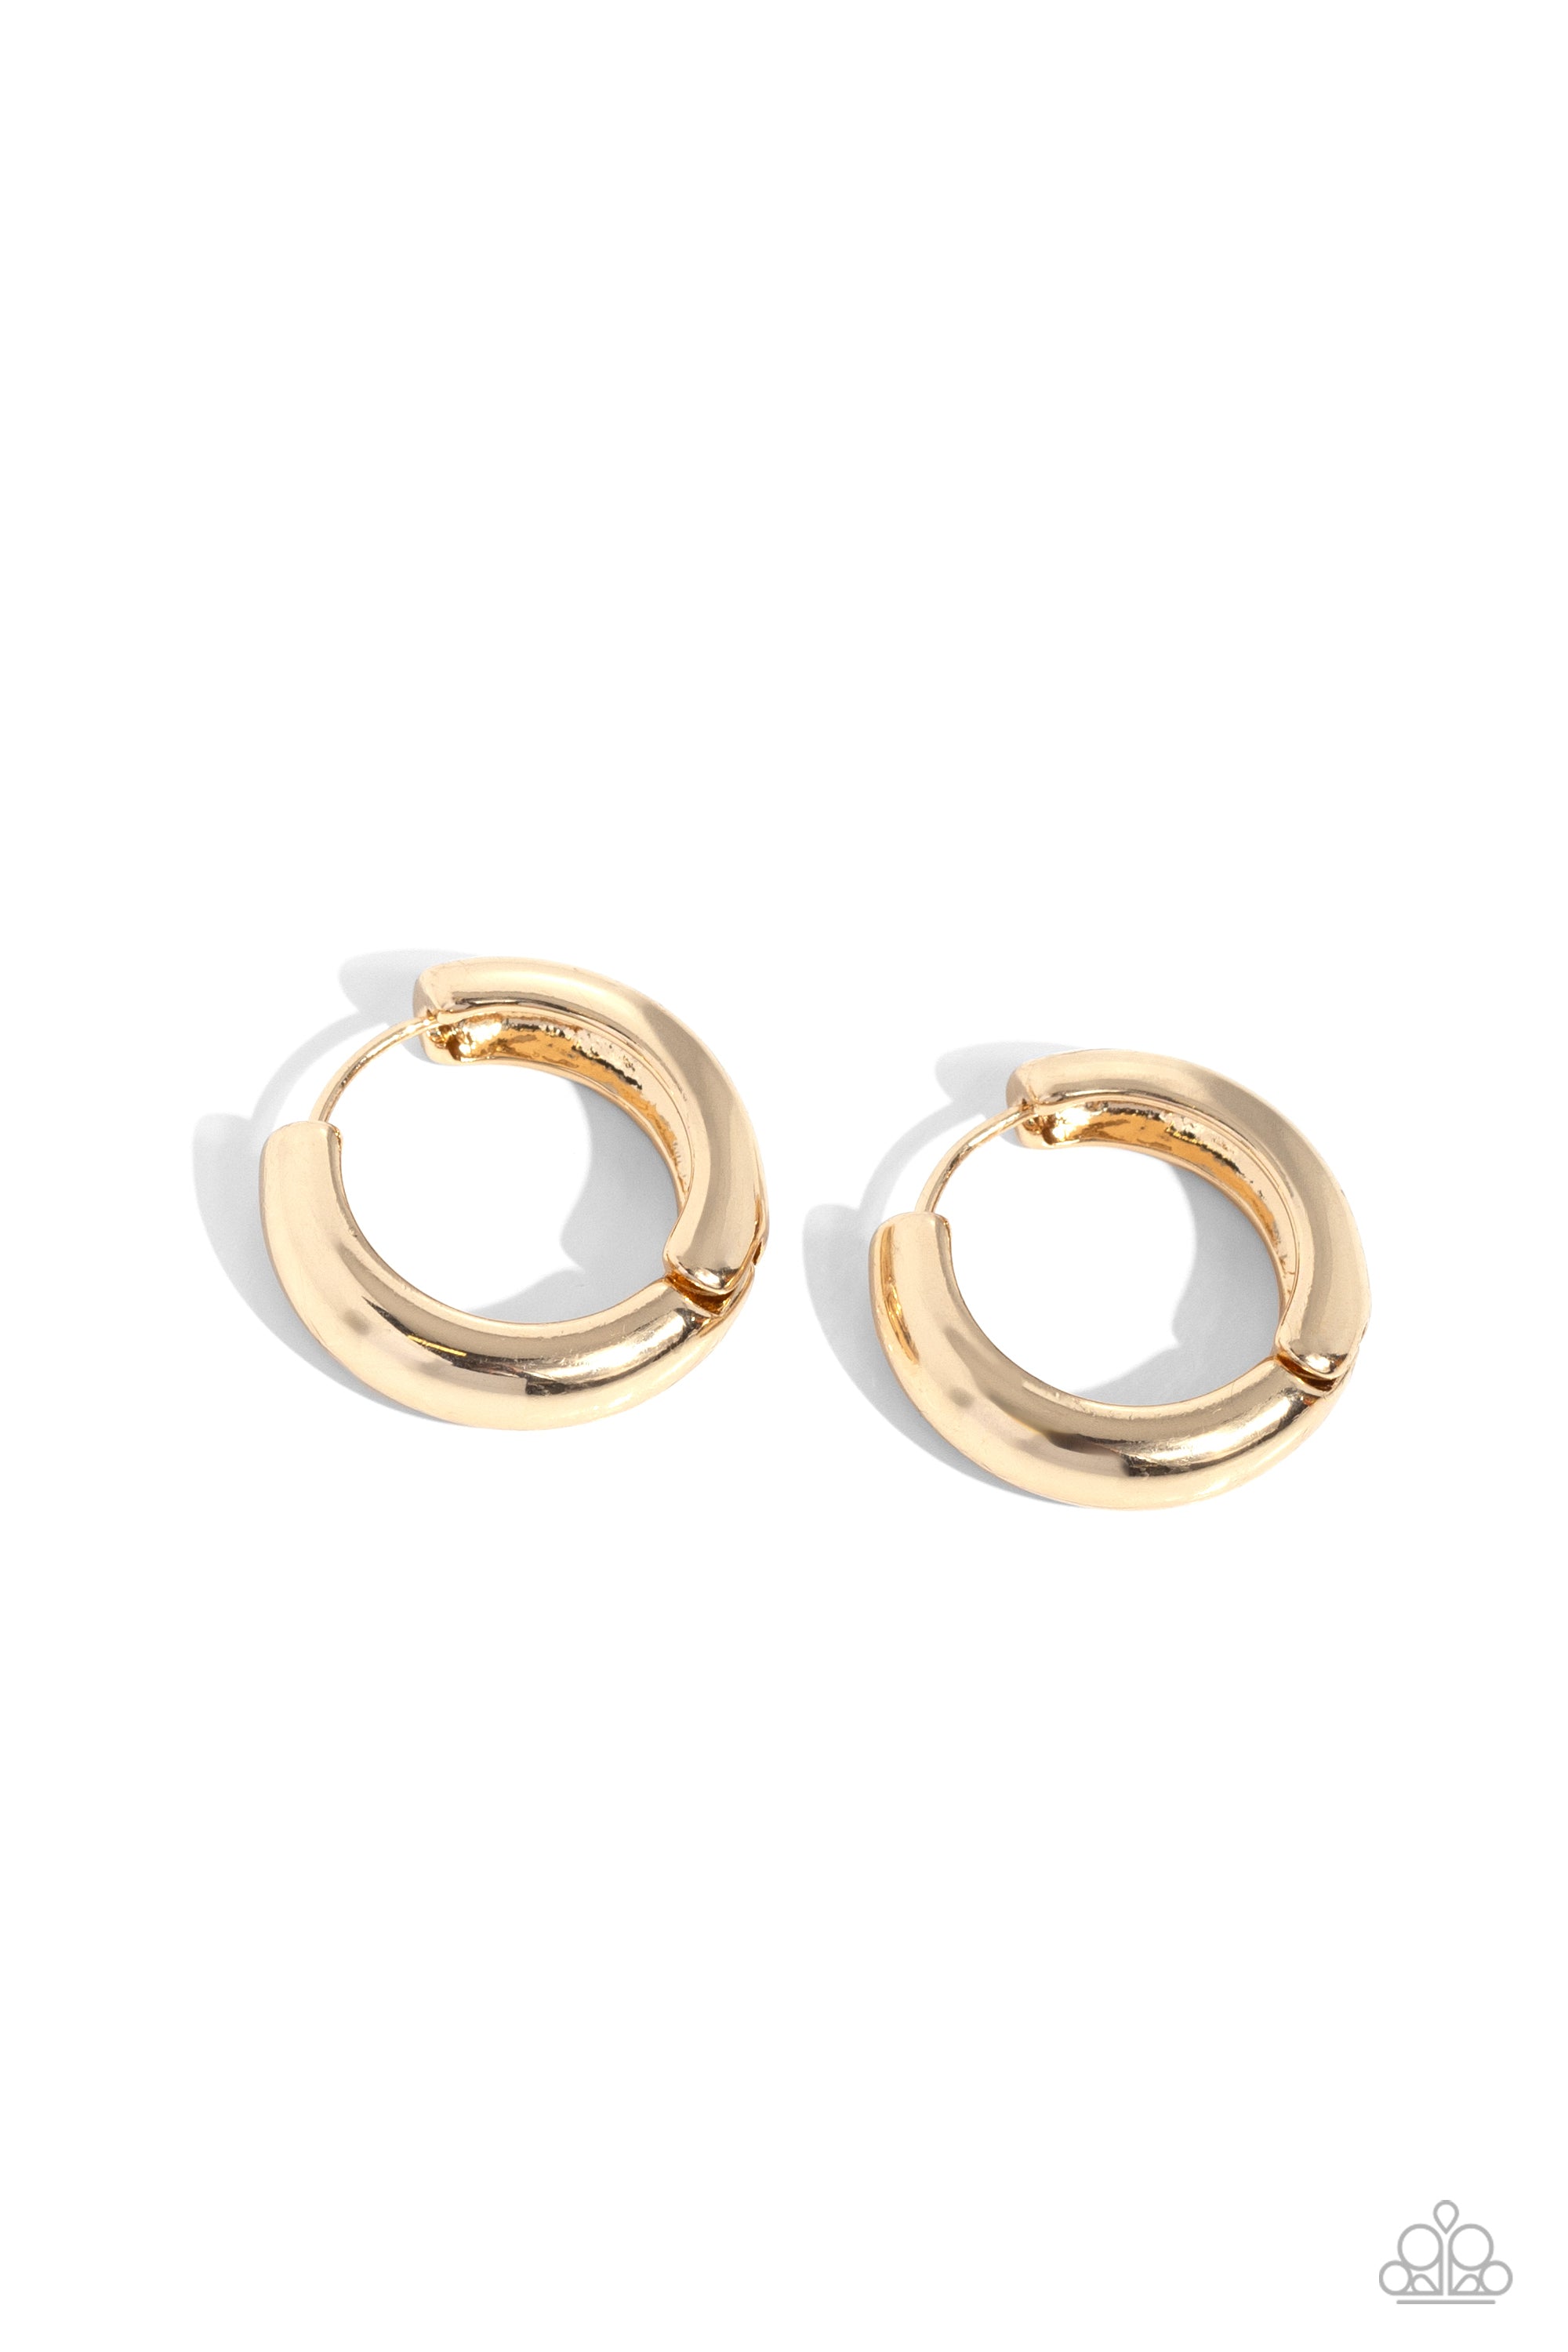 SIMPLY SINUOUS GOLD-EARRINGS